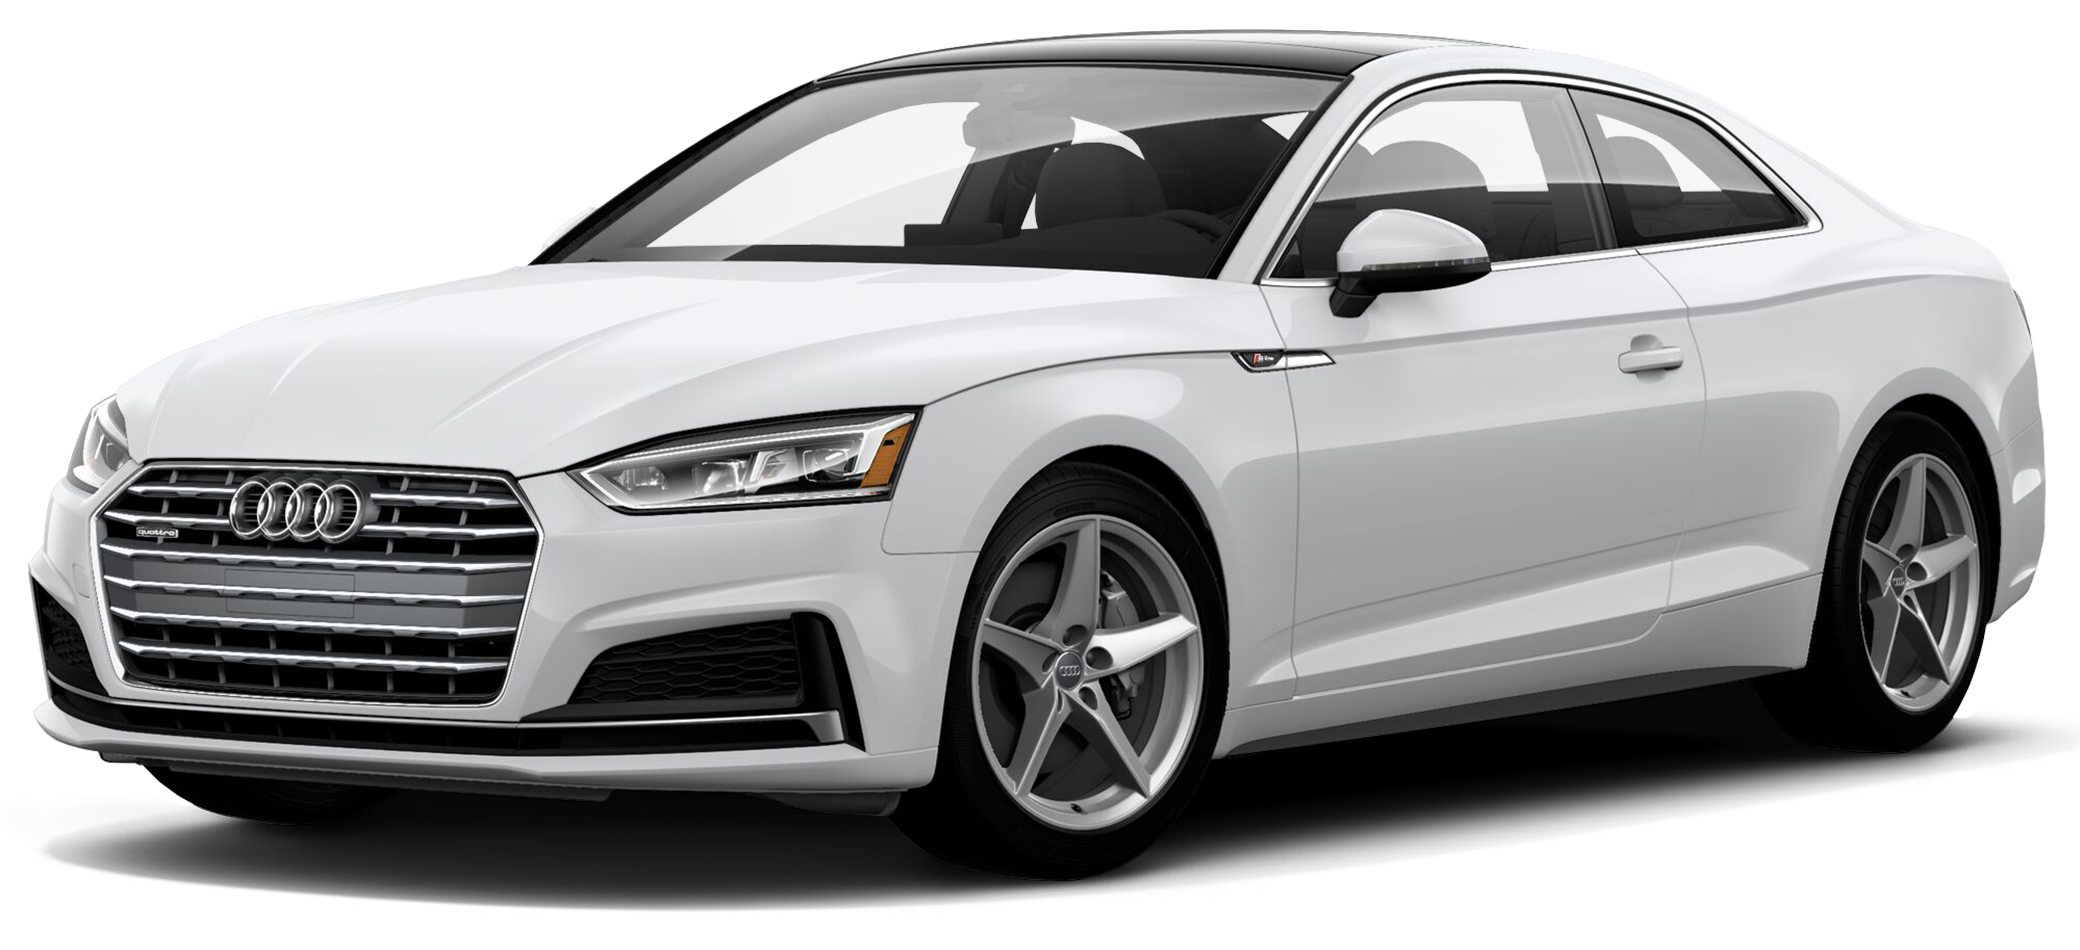 2019 Audi A5 Incentives, Specials & Offers in Bedford OH